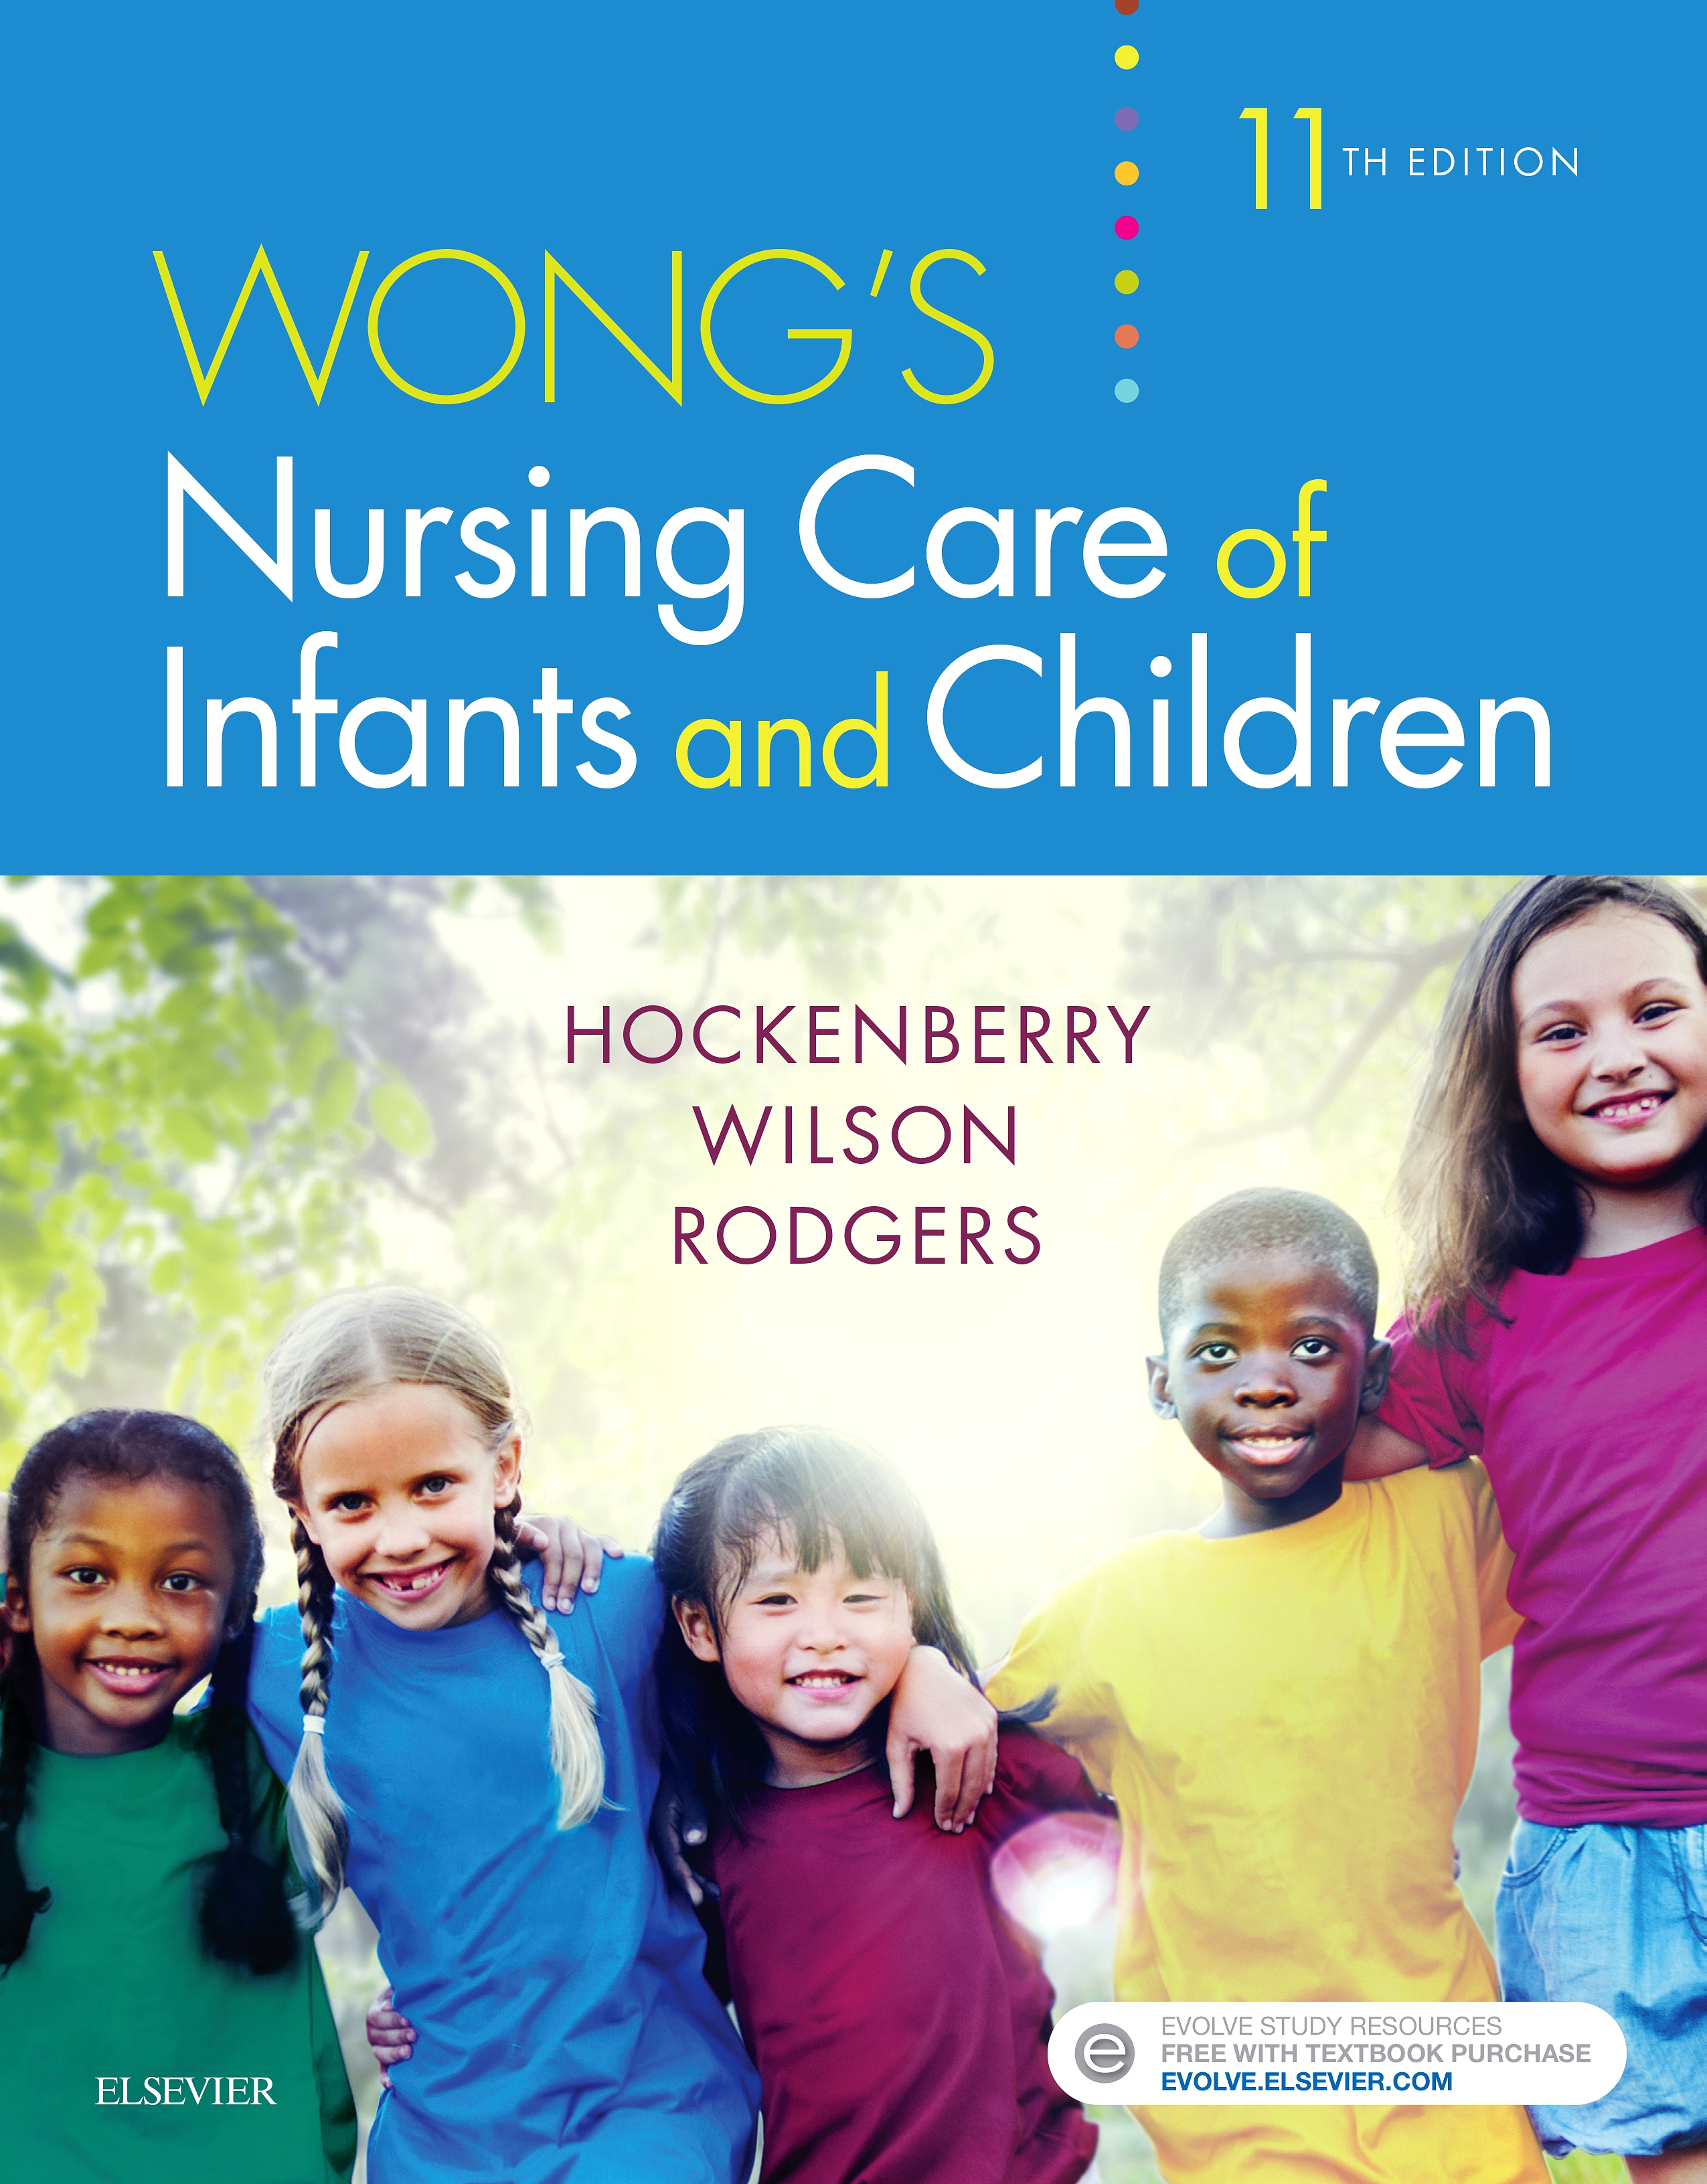 Evolve Resources for Wong's Nursing Care of Infants and Children, 11th Edition